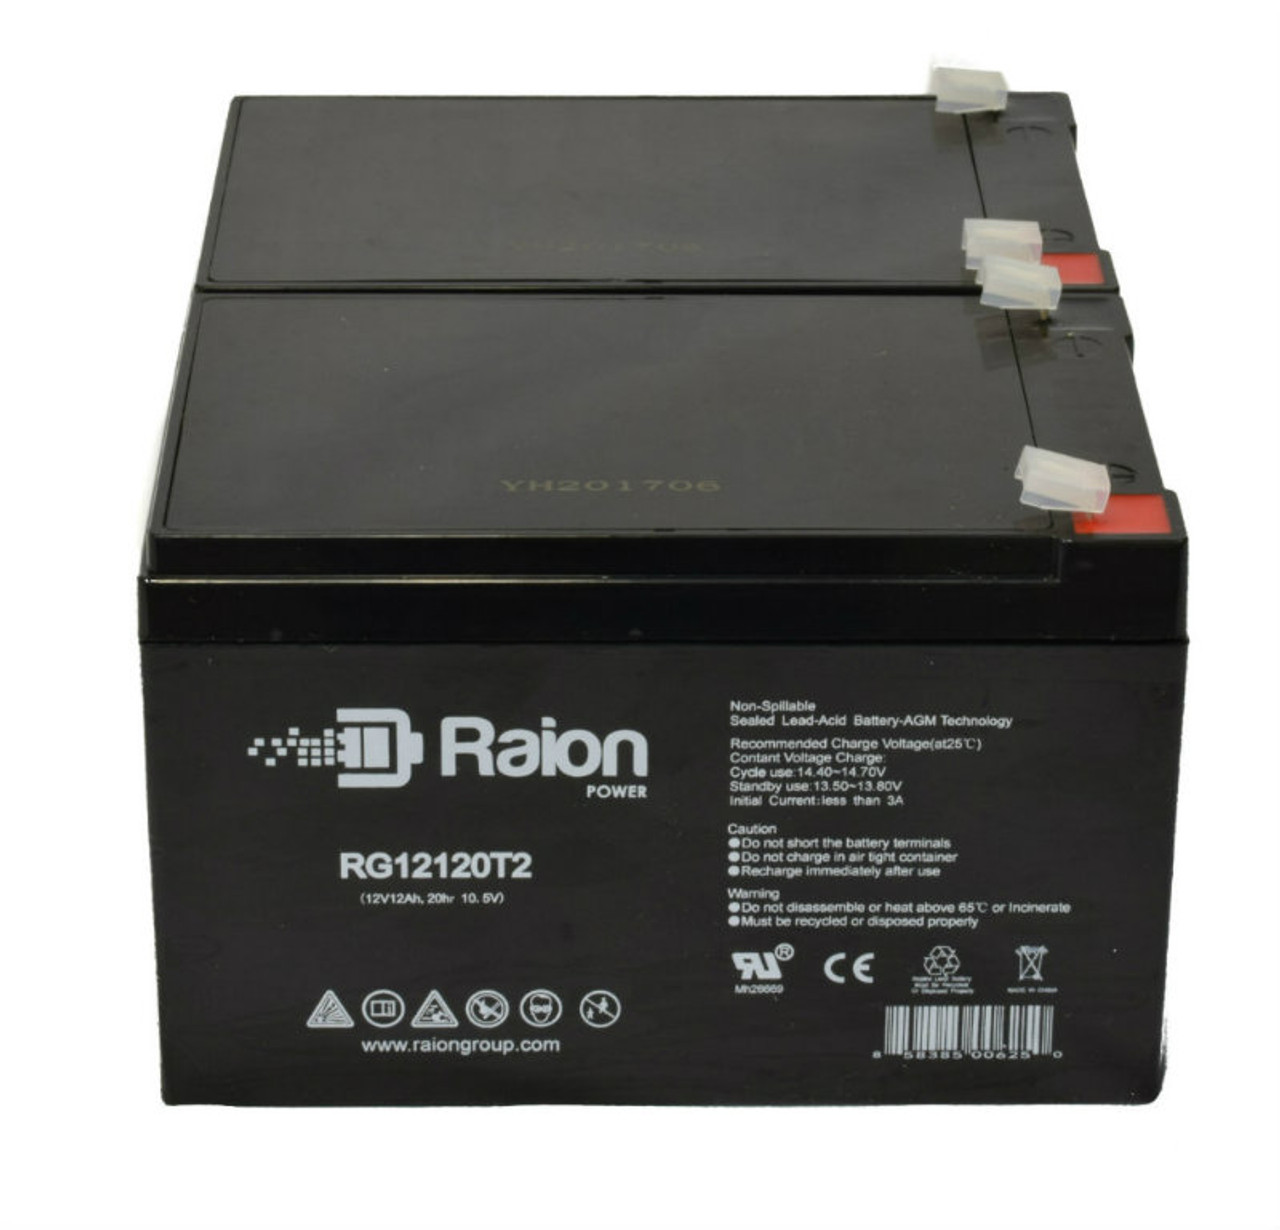 Raion Power 12V 12Ah Non-Spillable Compatible Replacement Battery for Ultracell UL14-12 - (2 Pack)